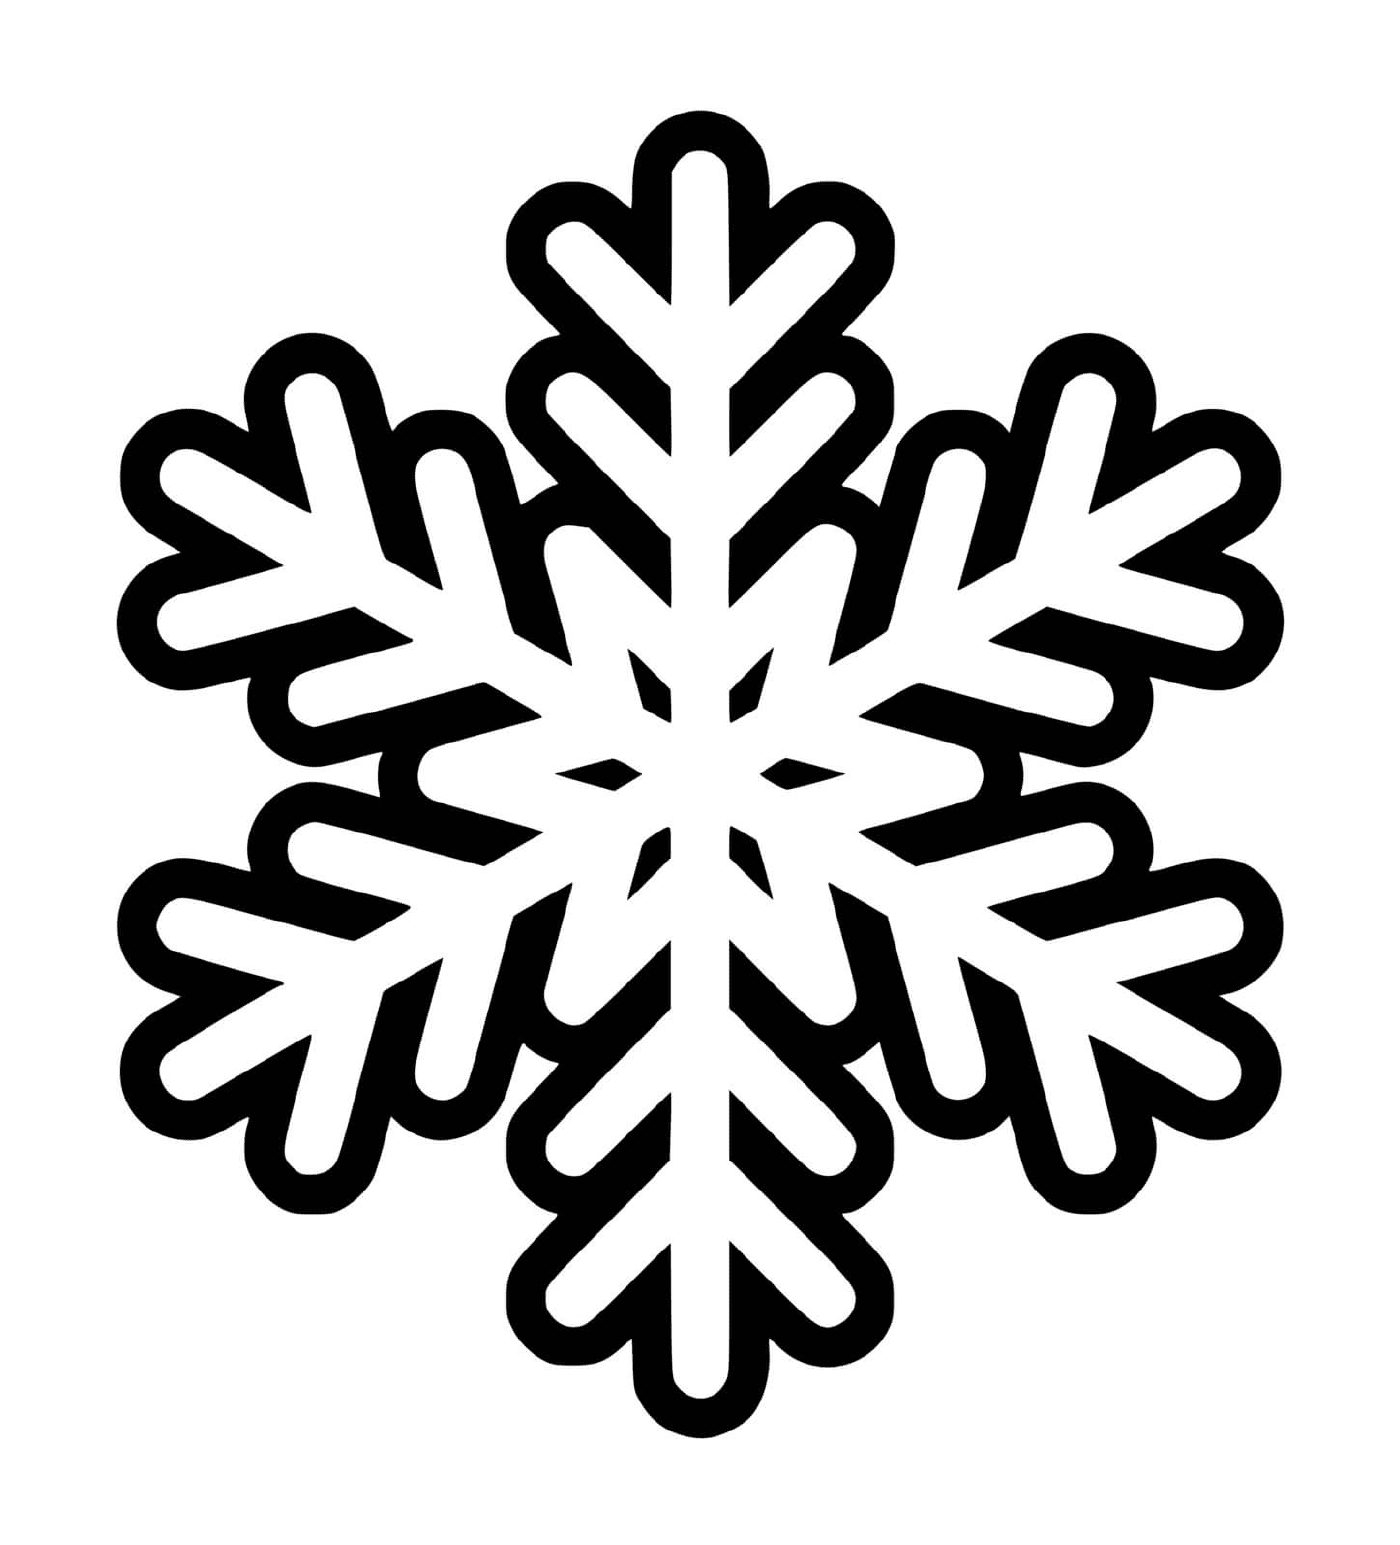  A snowflake for the little ones 